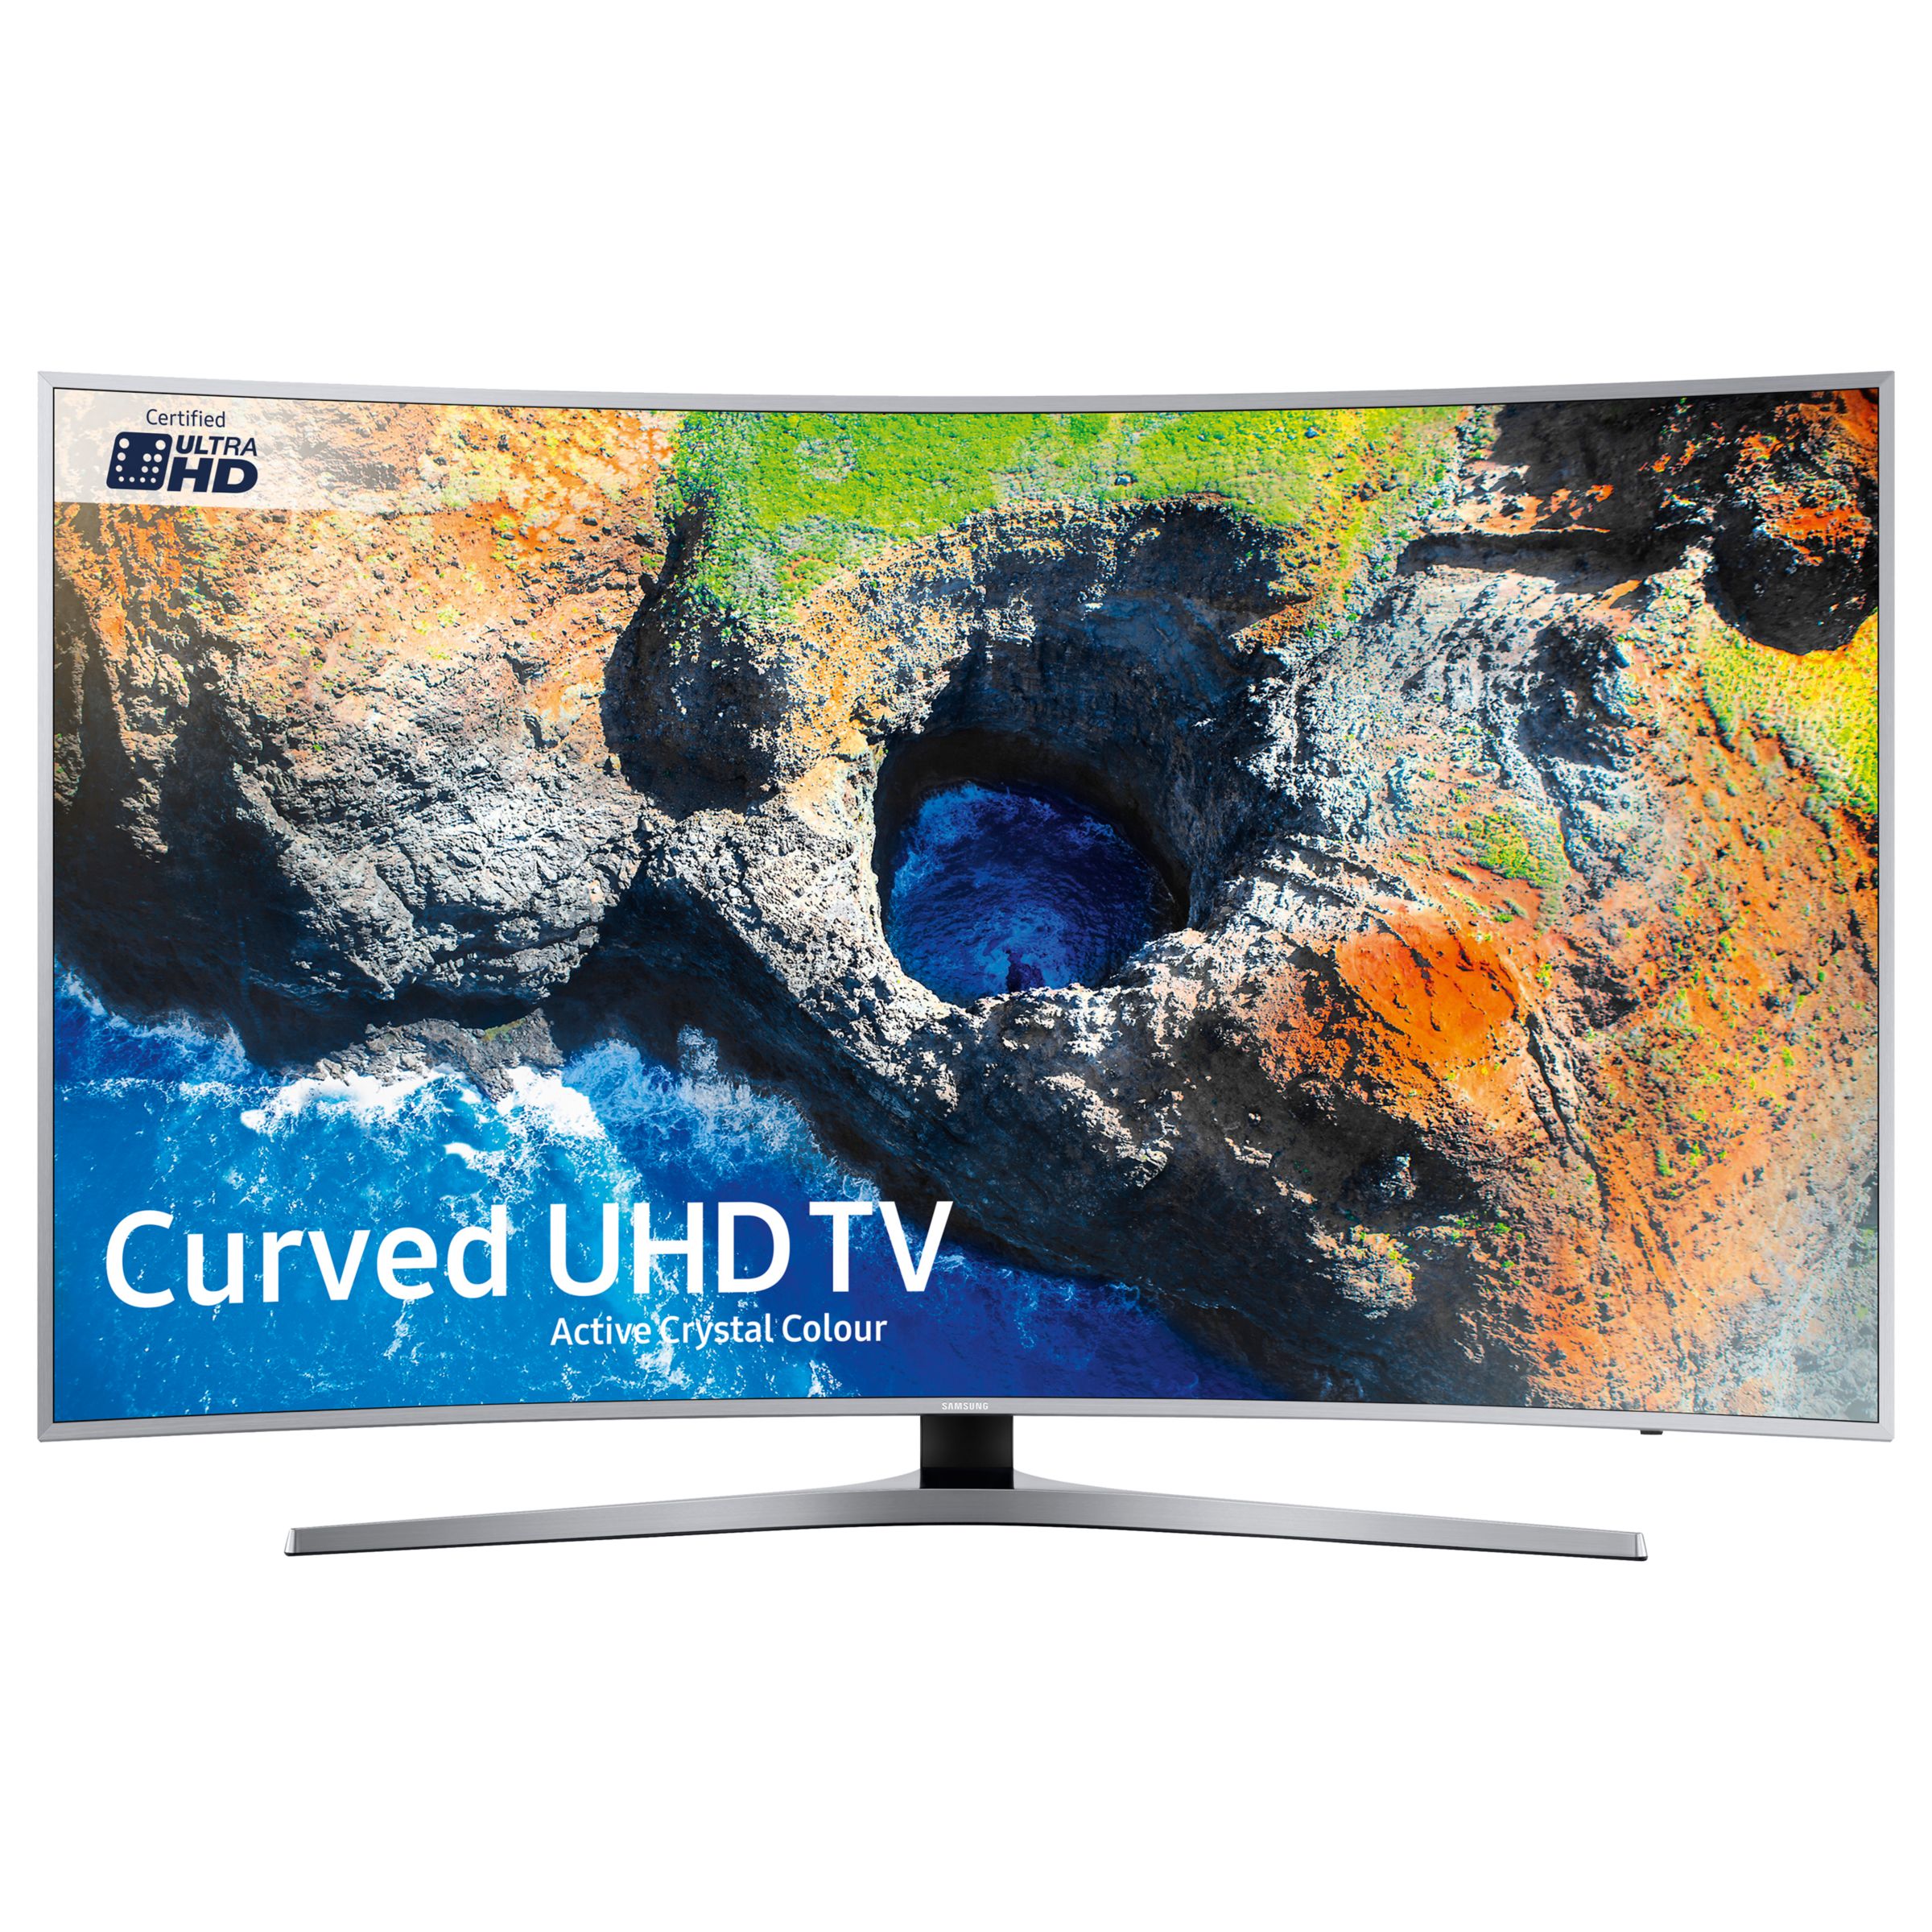 Samsung UE55MU6500 Curved HDR 4K Ultra HD Smart TV, 55" with TVPlus/Freesat HD & Active Crystal Colour, Ultra HD Certified, Silver